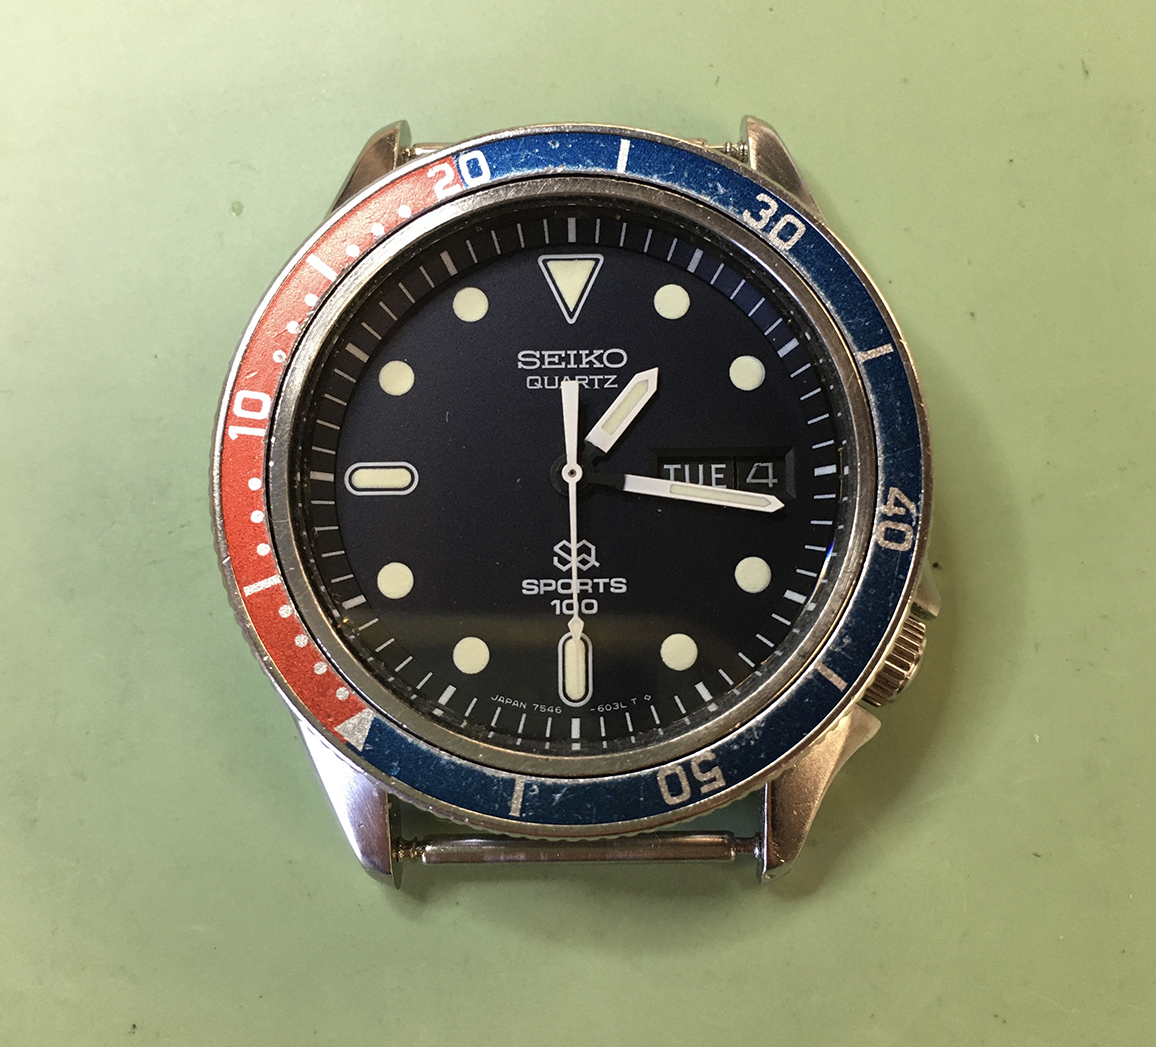 Seiko 7546 quartz - what lubricants do I use? - Lubrication Techniques,  Oils, Greases, Epilame Treatments - Watch Repair Talk